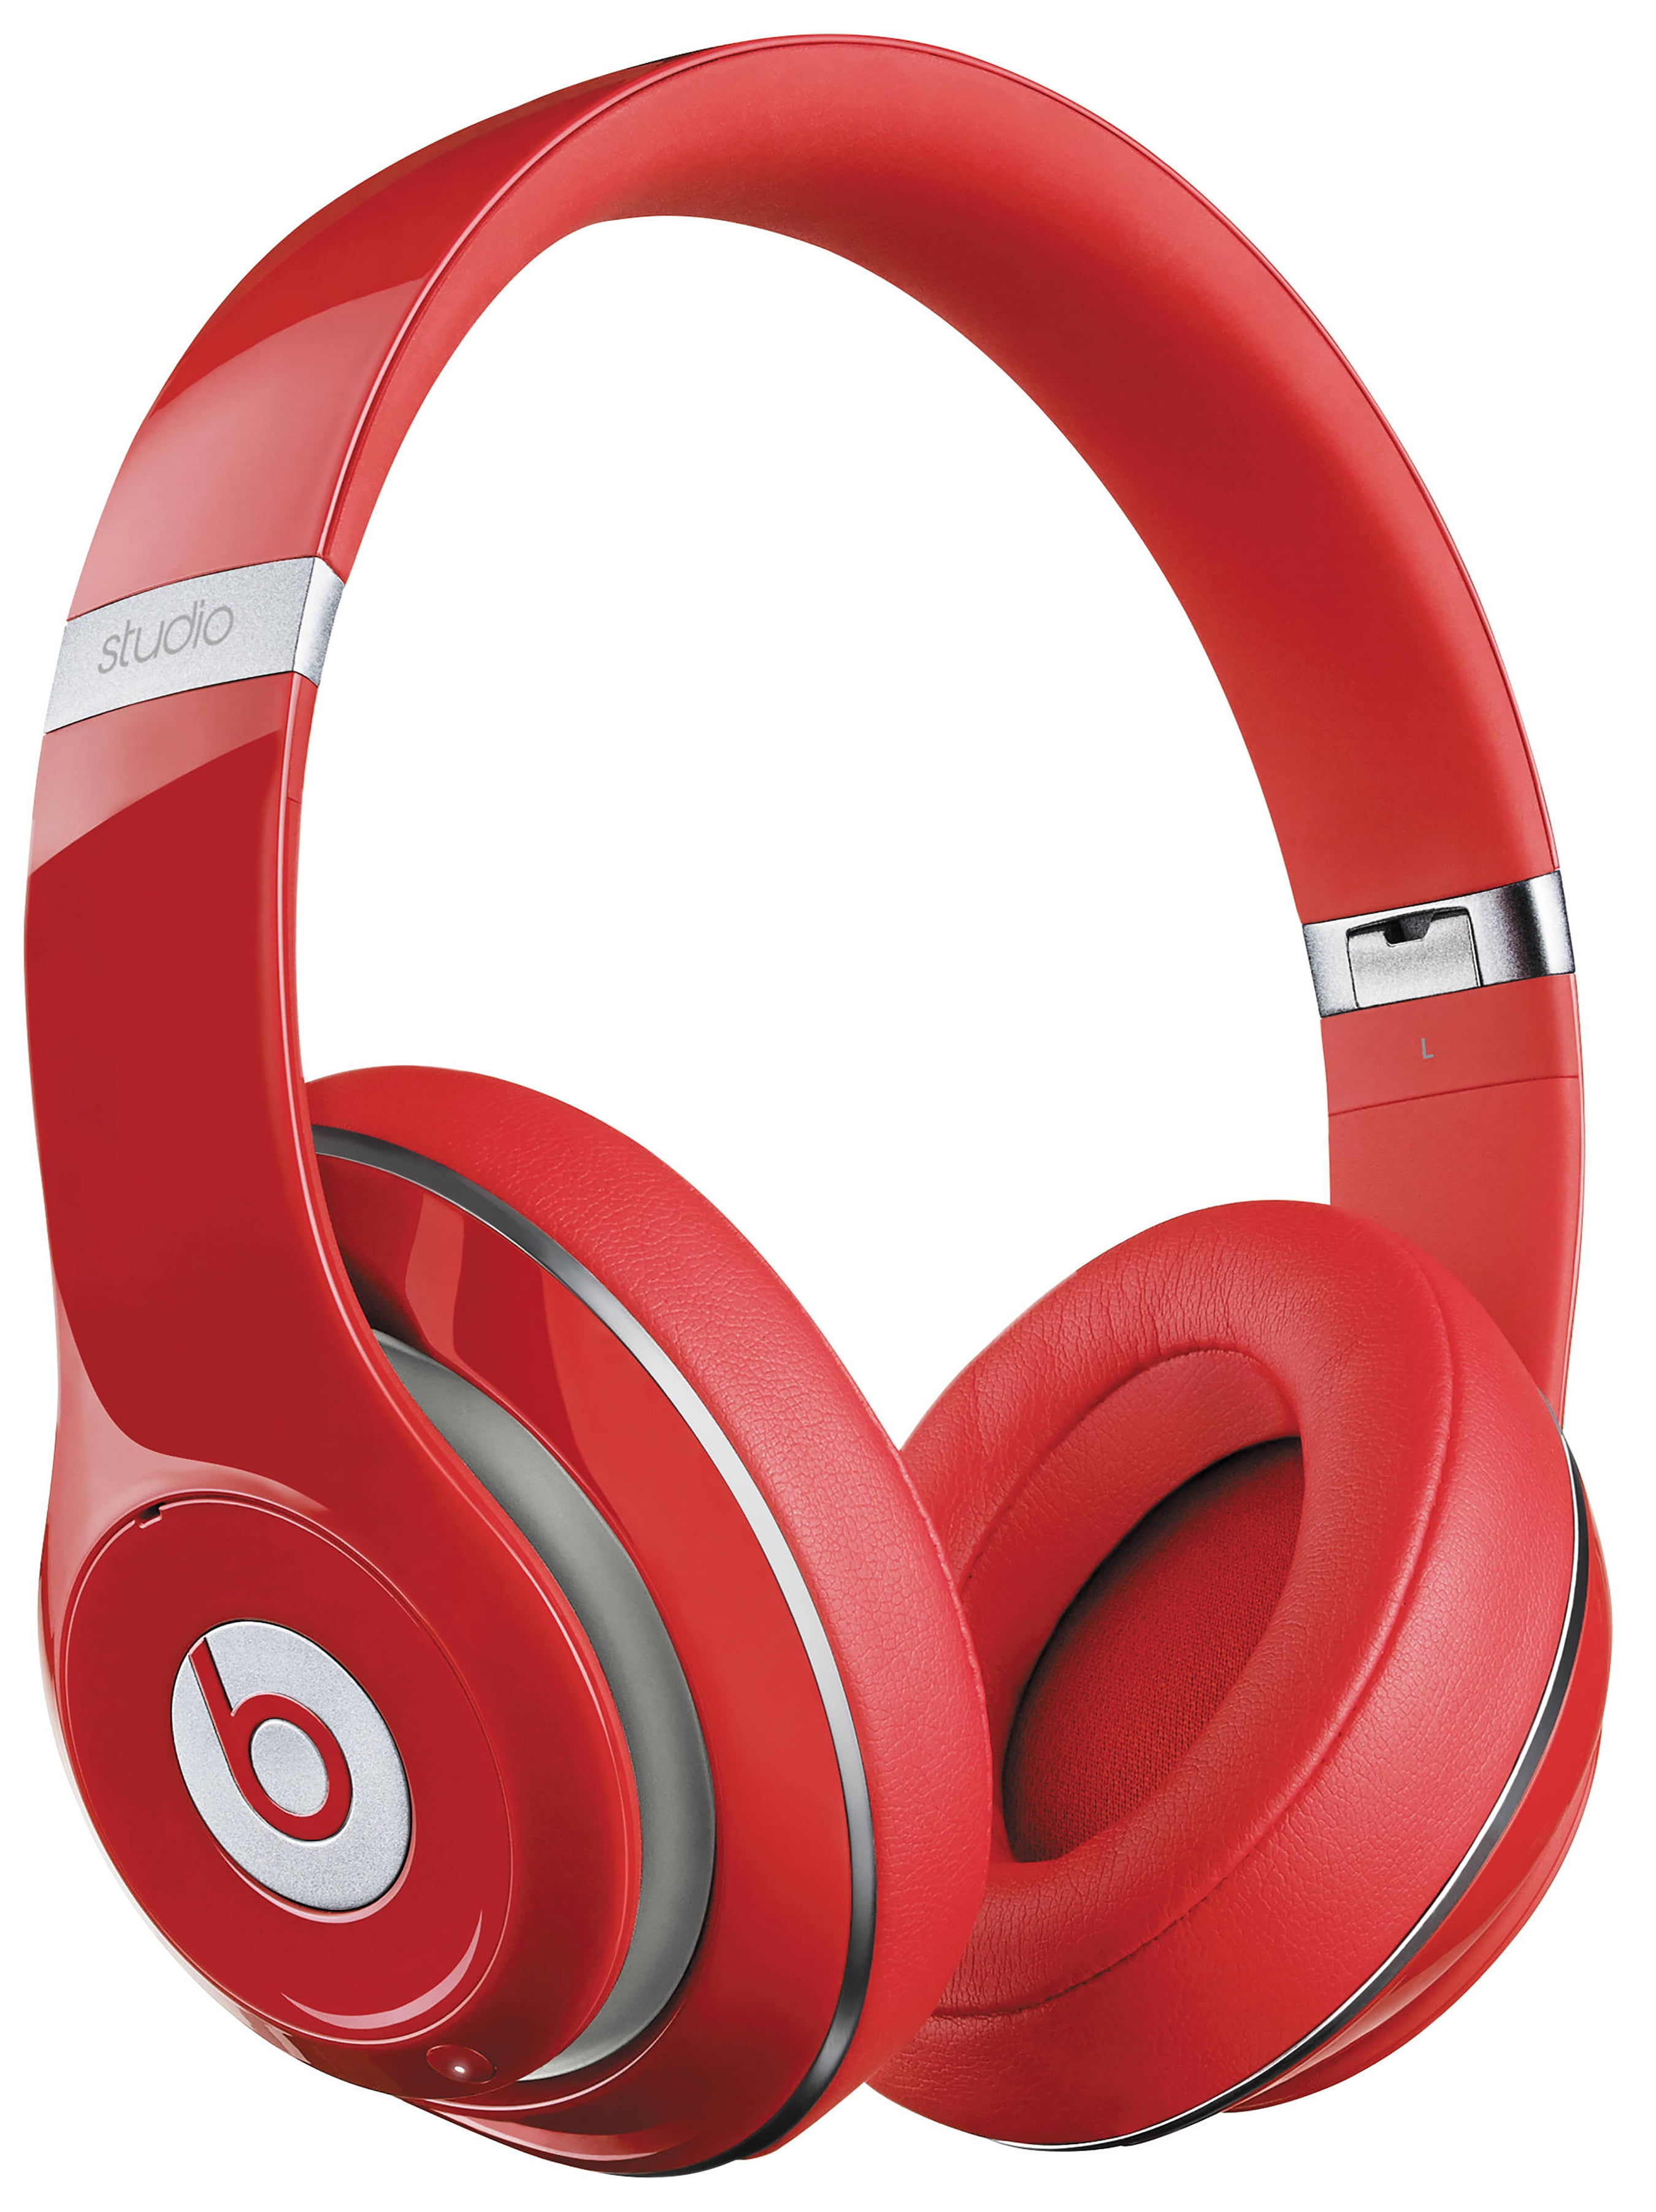 Beats by Dr. Dre - Studio2 Wireless Over-Ear - Red Used) - Walmart.com